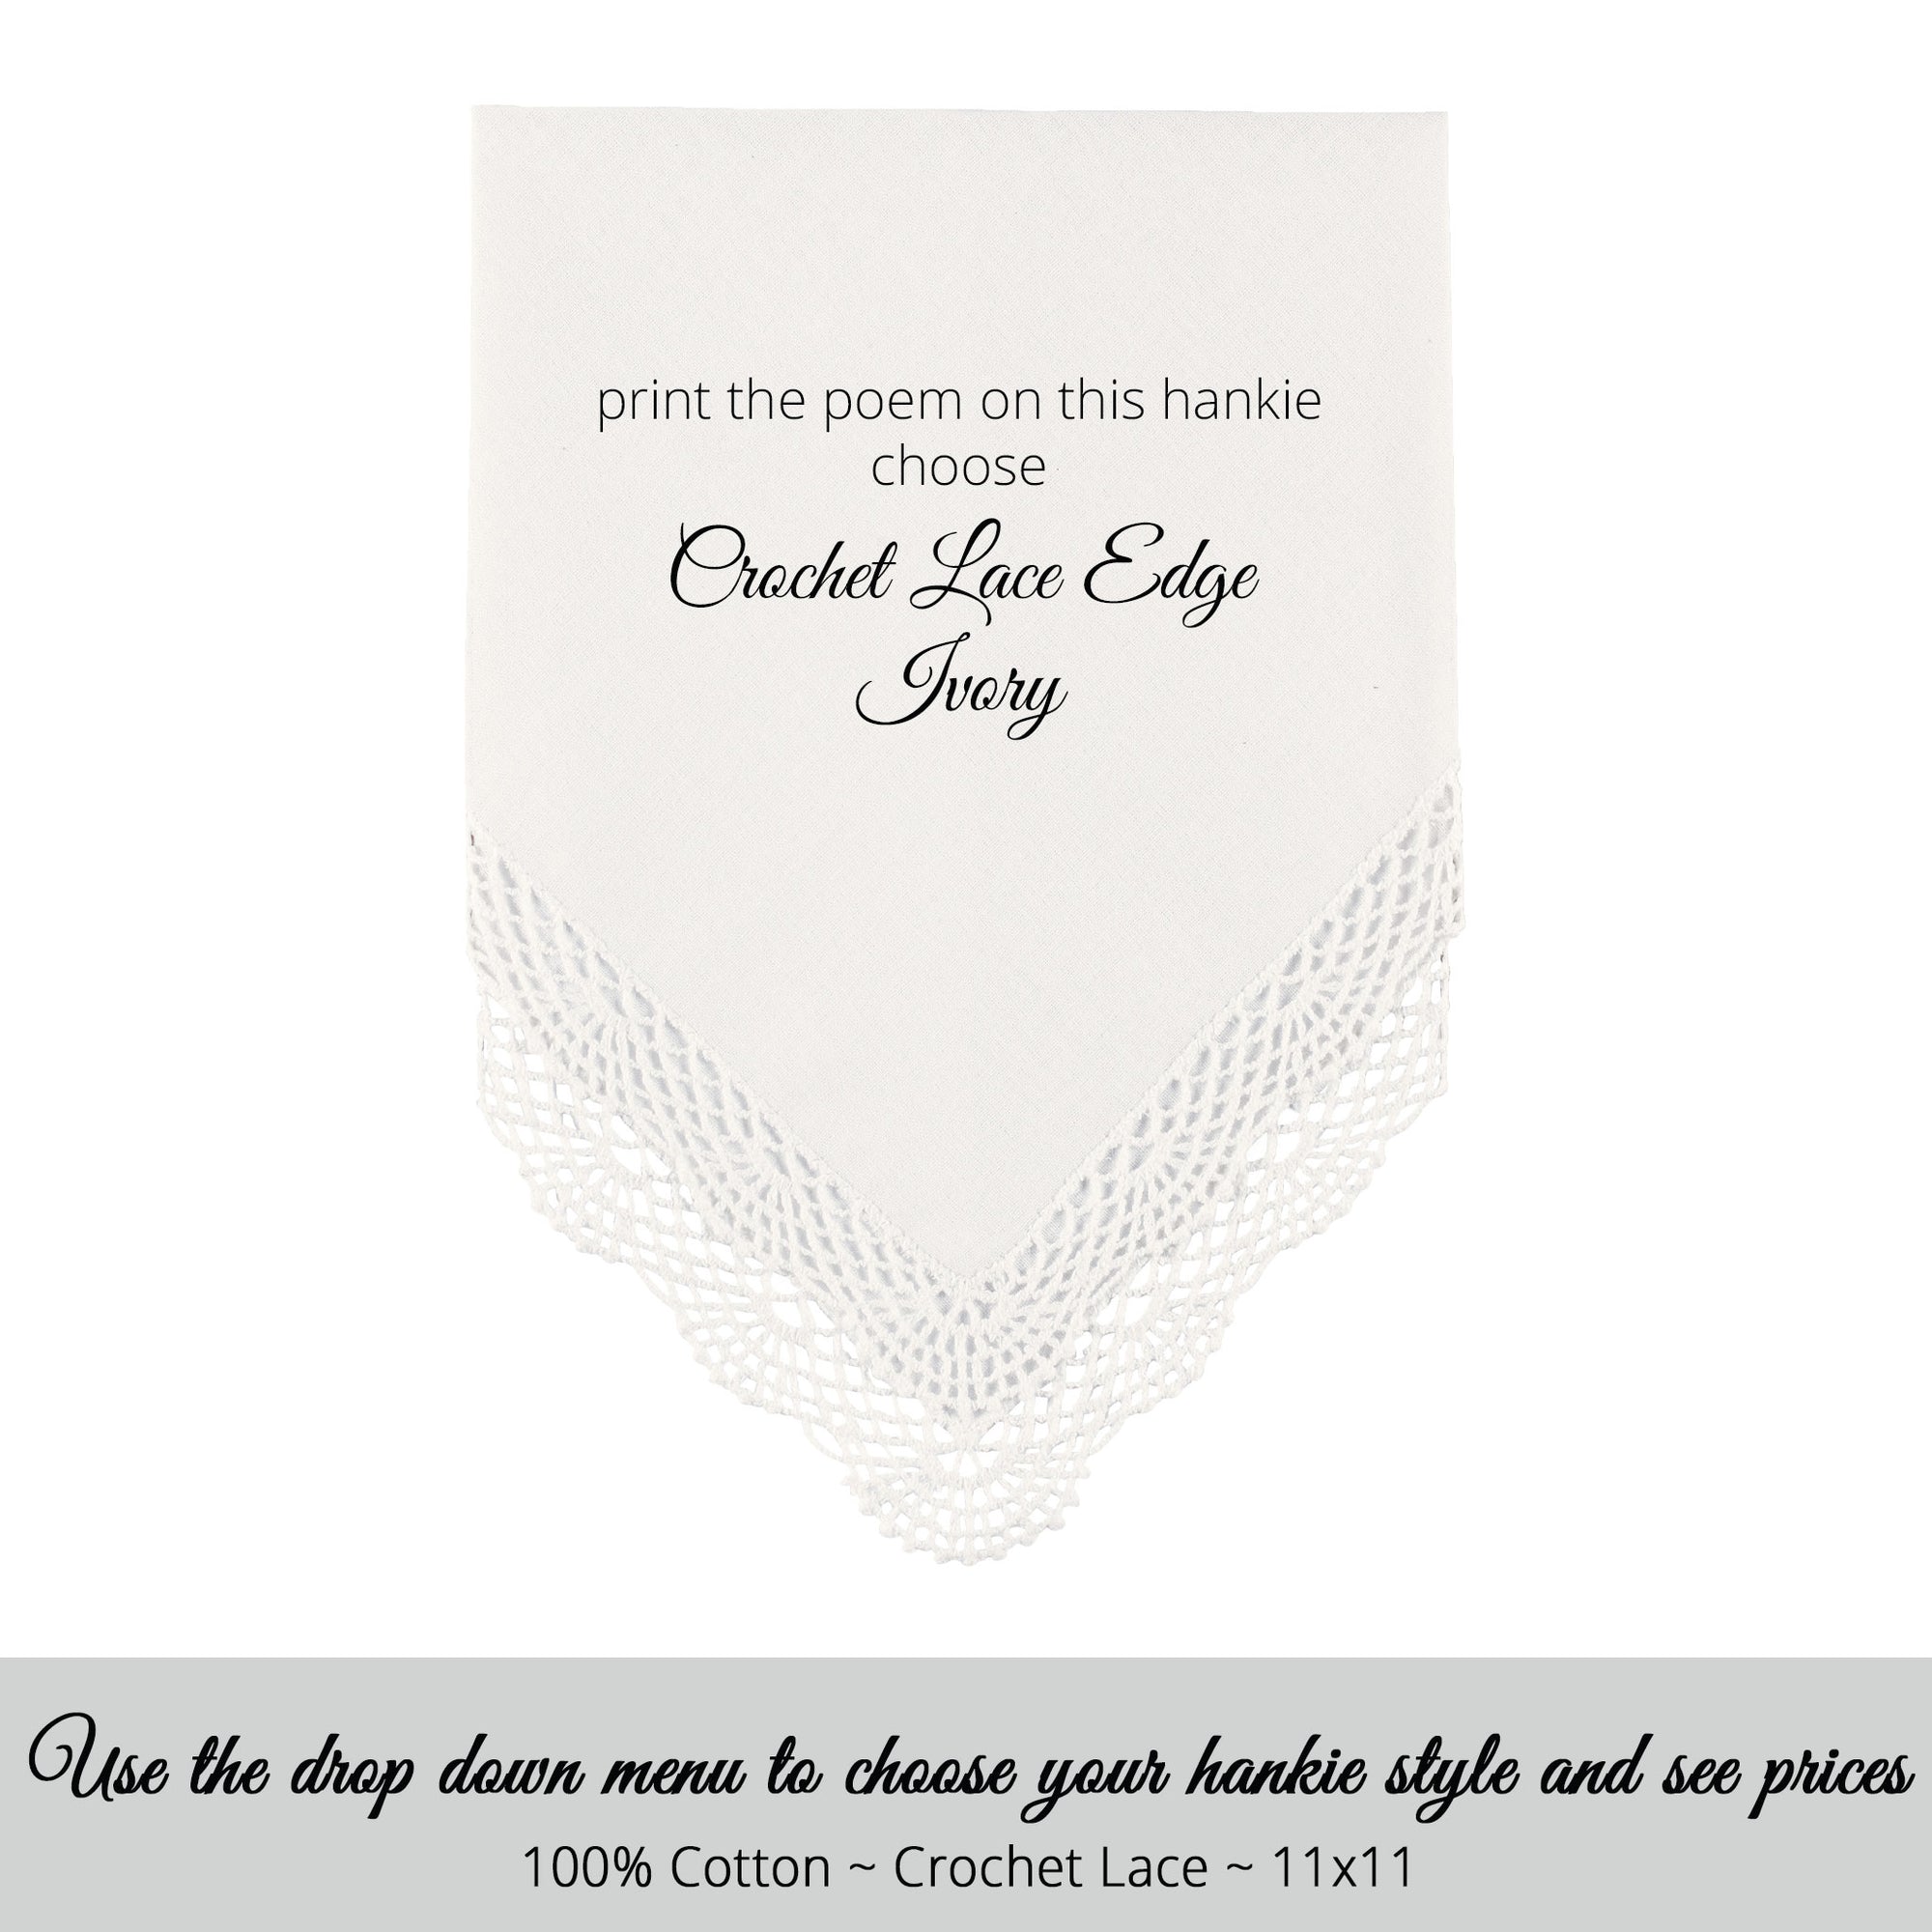 Wedding handkerchief ivory with crochet lace edge for the mother of the groom printed hankie